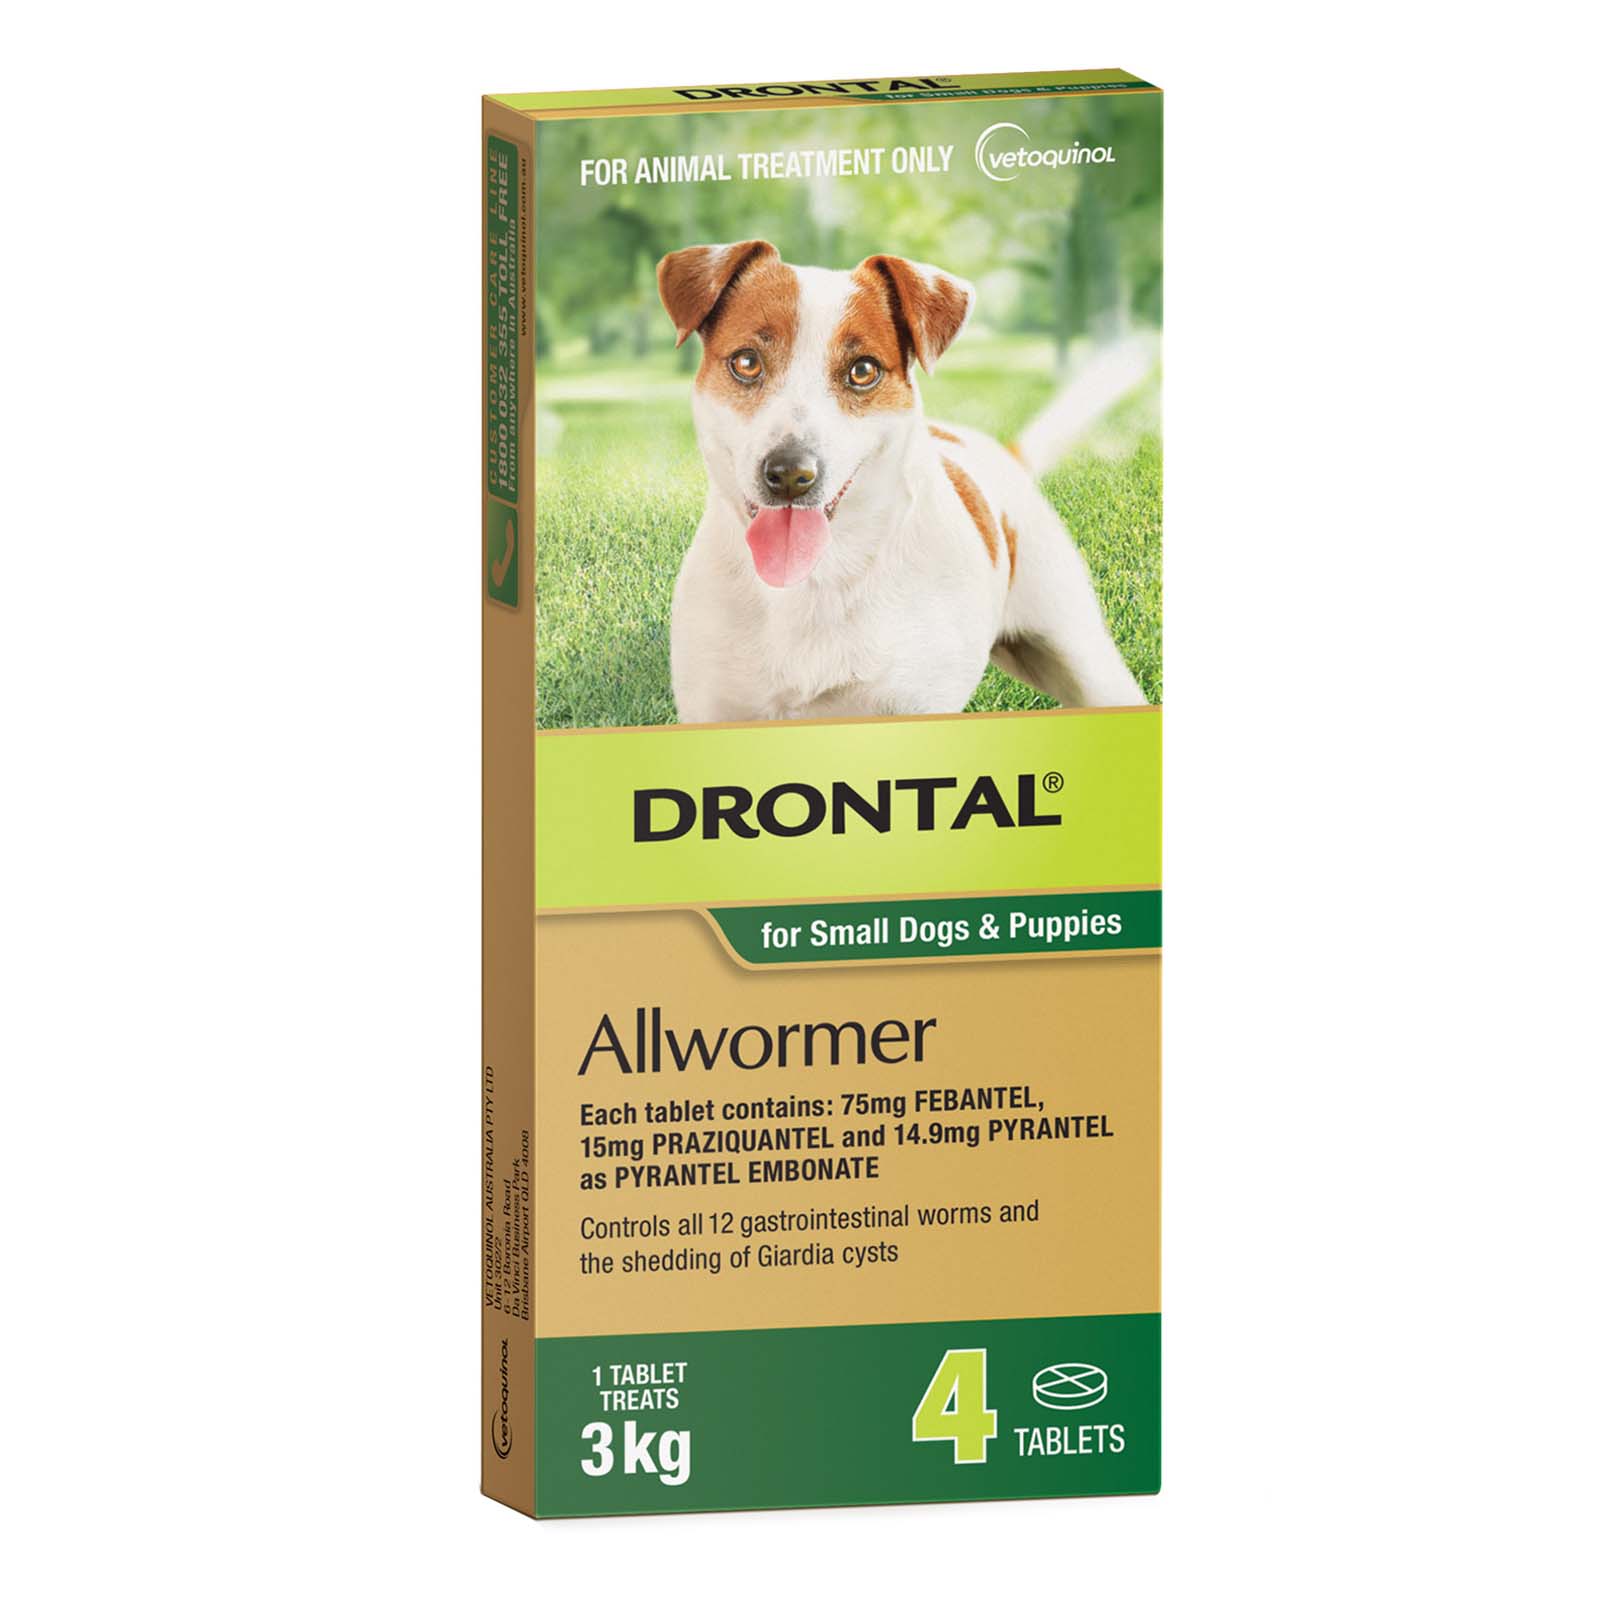 Drontal Wormers - Dogs for Dogs